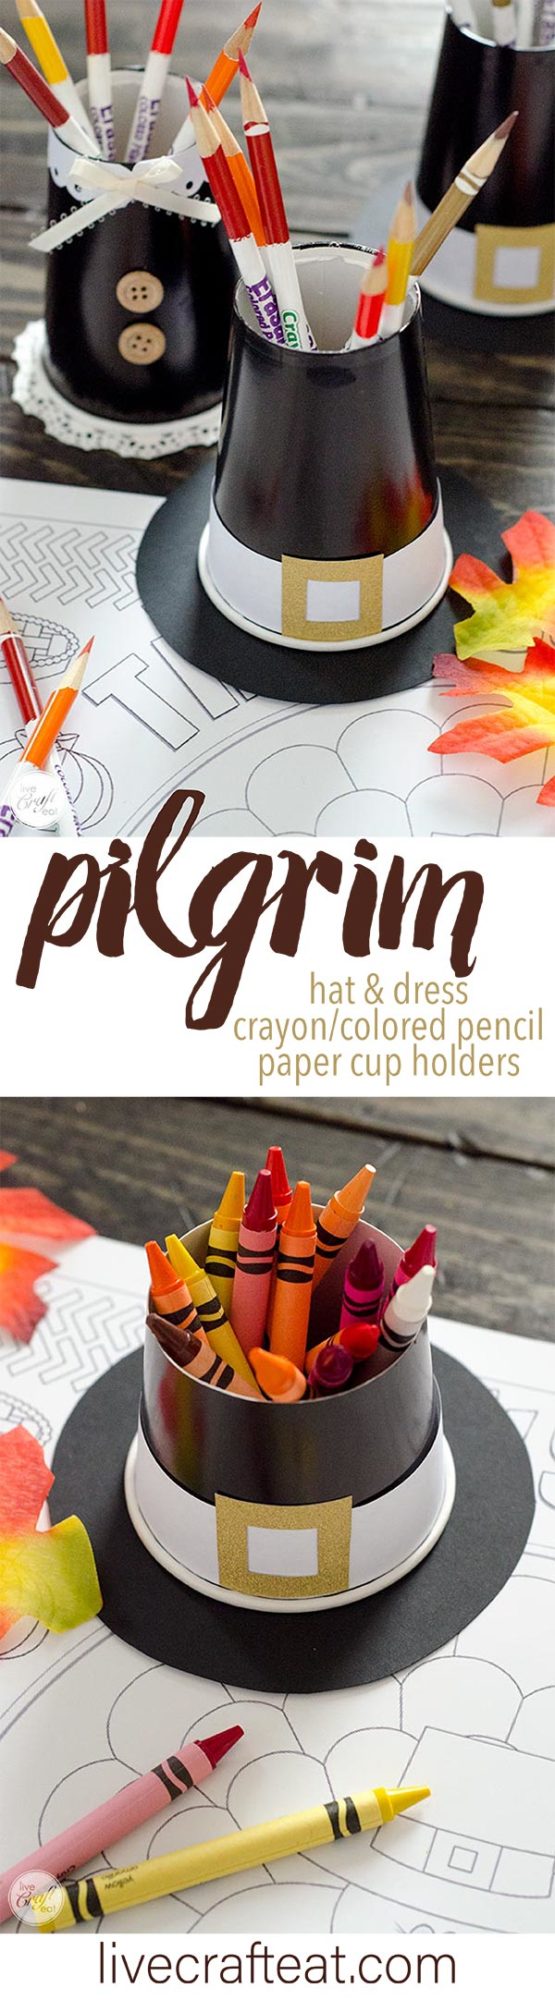 these pilgrim hat and dress crayon/colored pencil cup holders are so perfect for thanksgiving!!